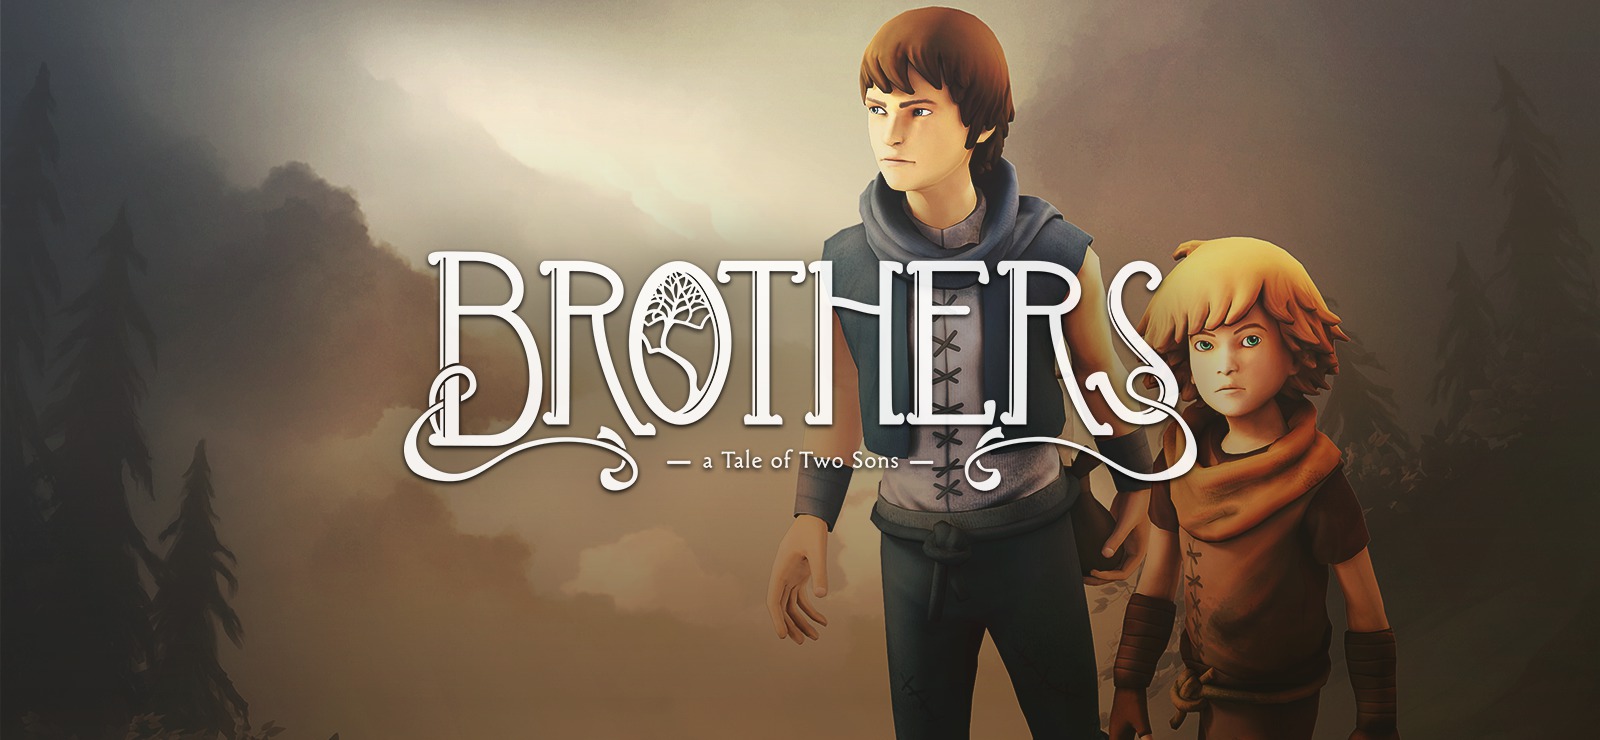 Brothers - A Tale of Two Sons #2 (упоротое прохождение).